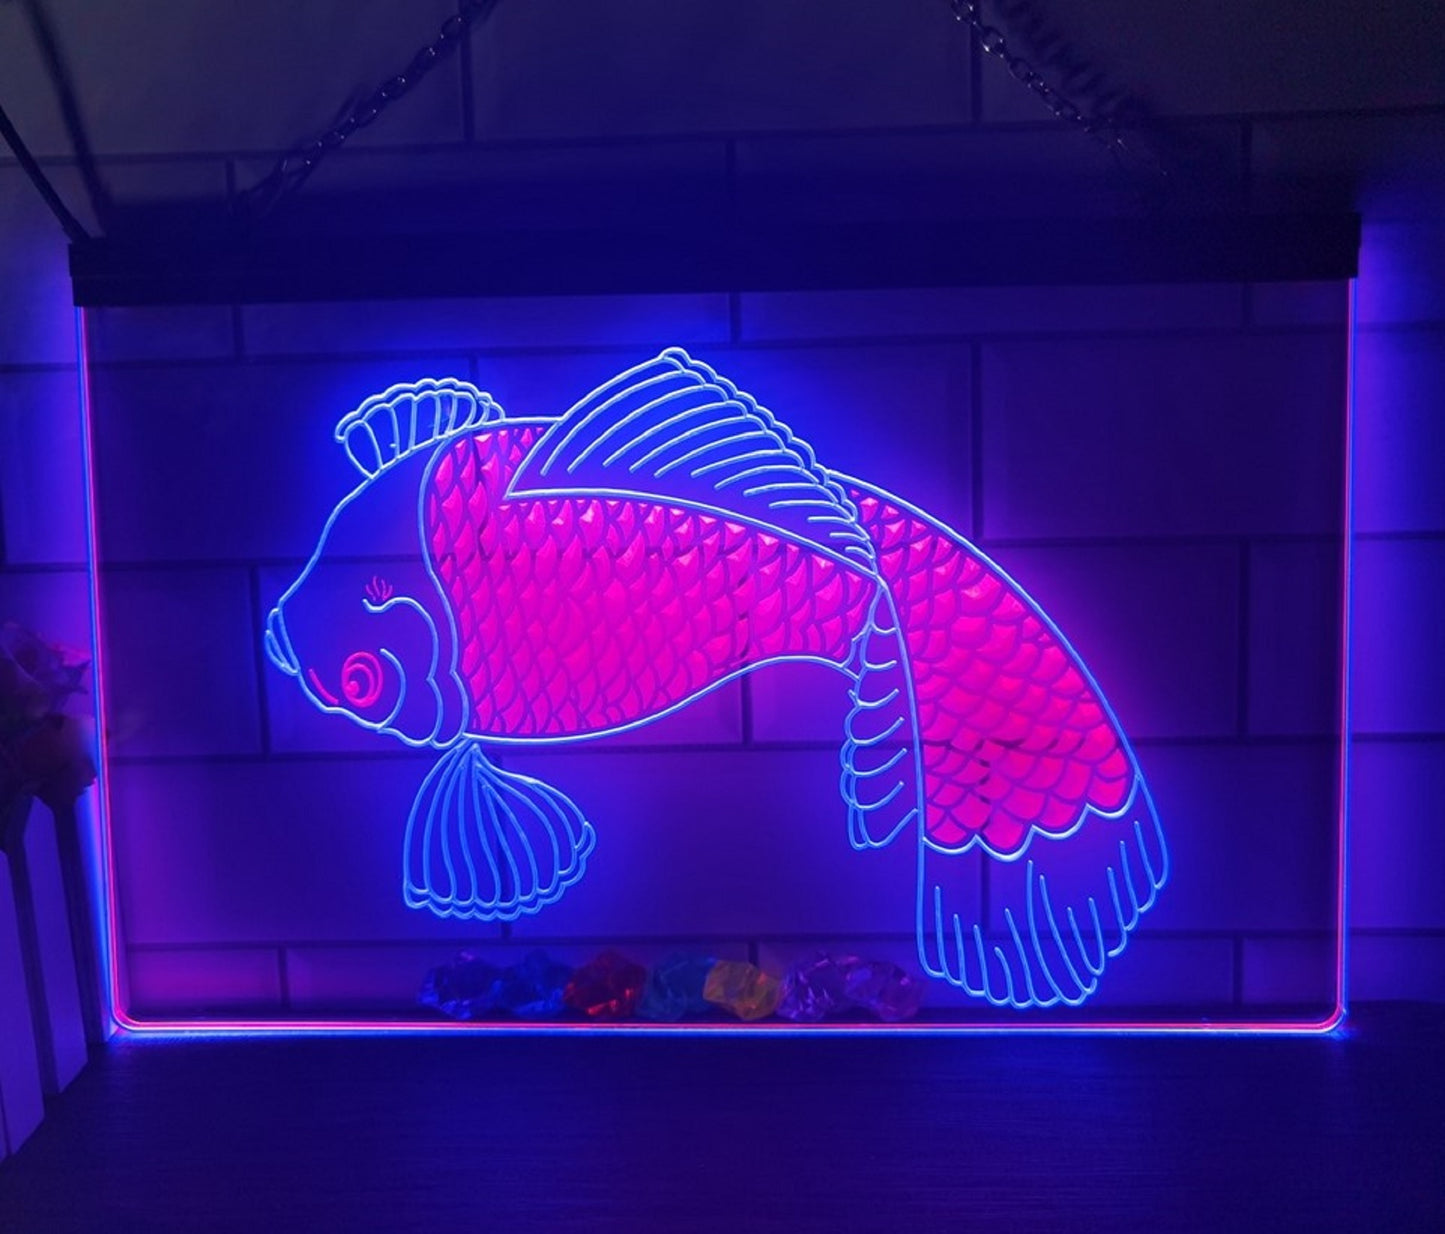 Neon Sign Dual Color Large Fish Sea Food Restaurant Decor Wall Table Top Decor